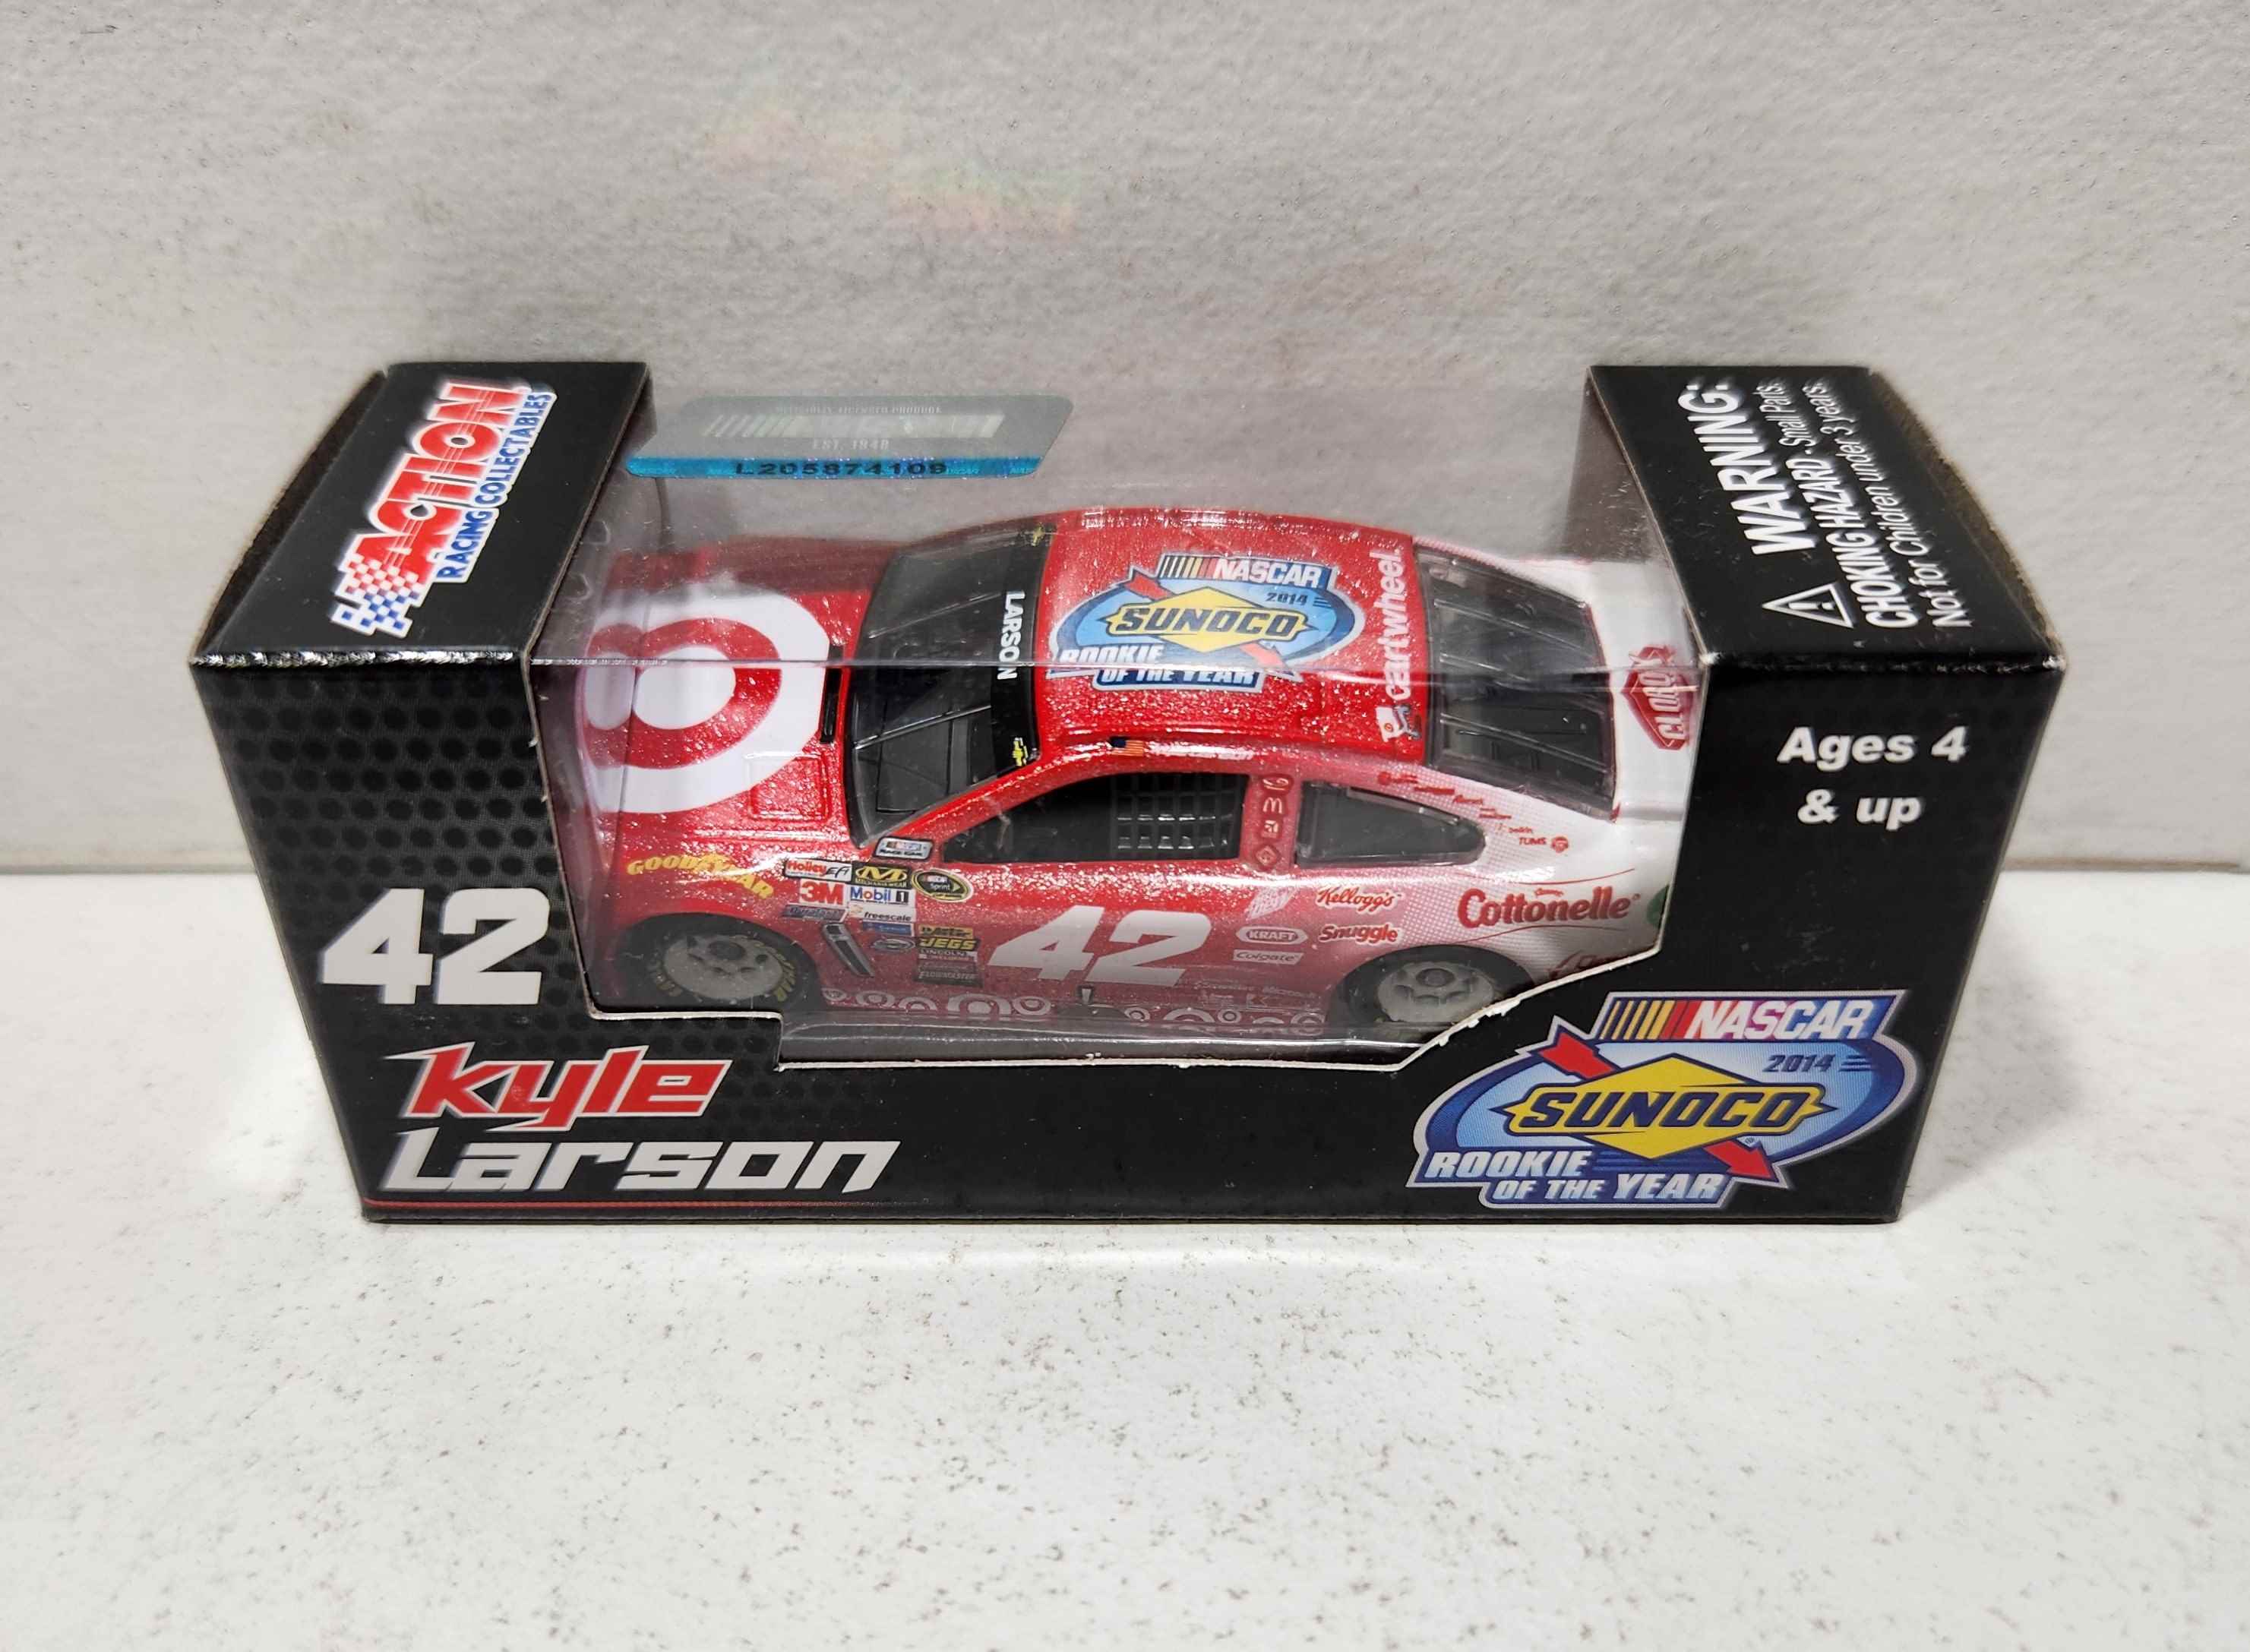 2014 Kyle Larson 1/64th Target "Rookie of the Year" Gaxaly Finish" Pitstop Series Chevrolet SS